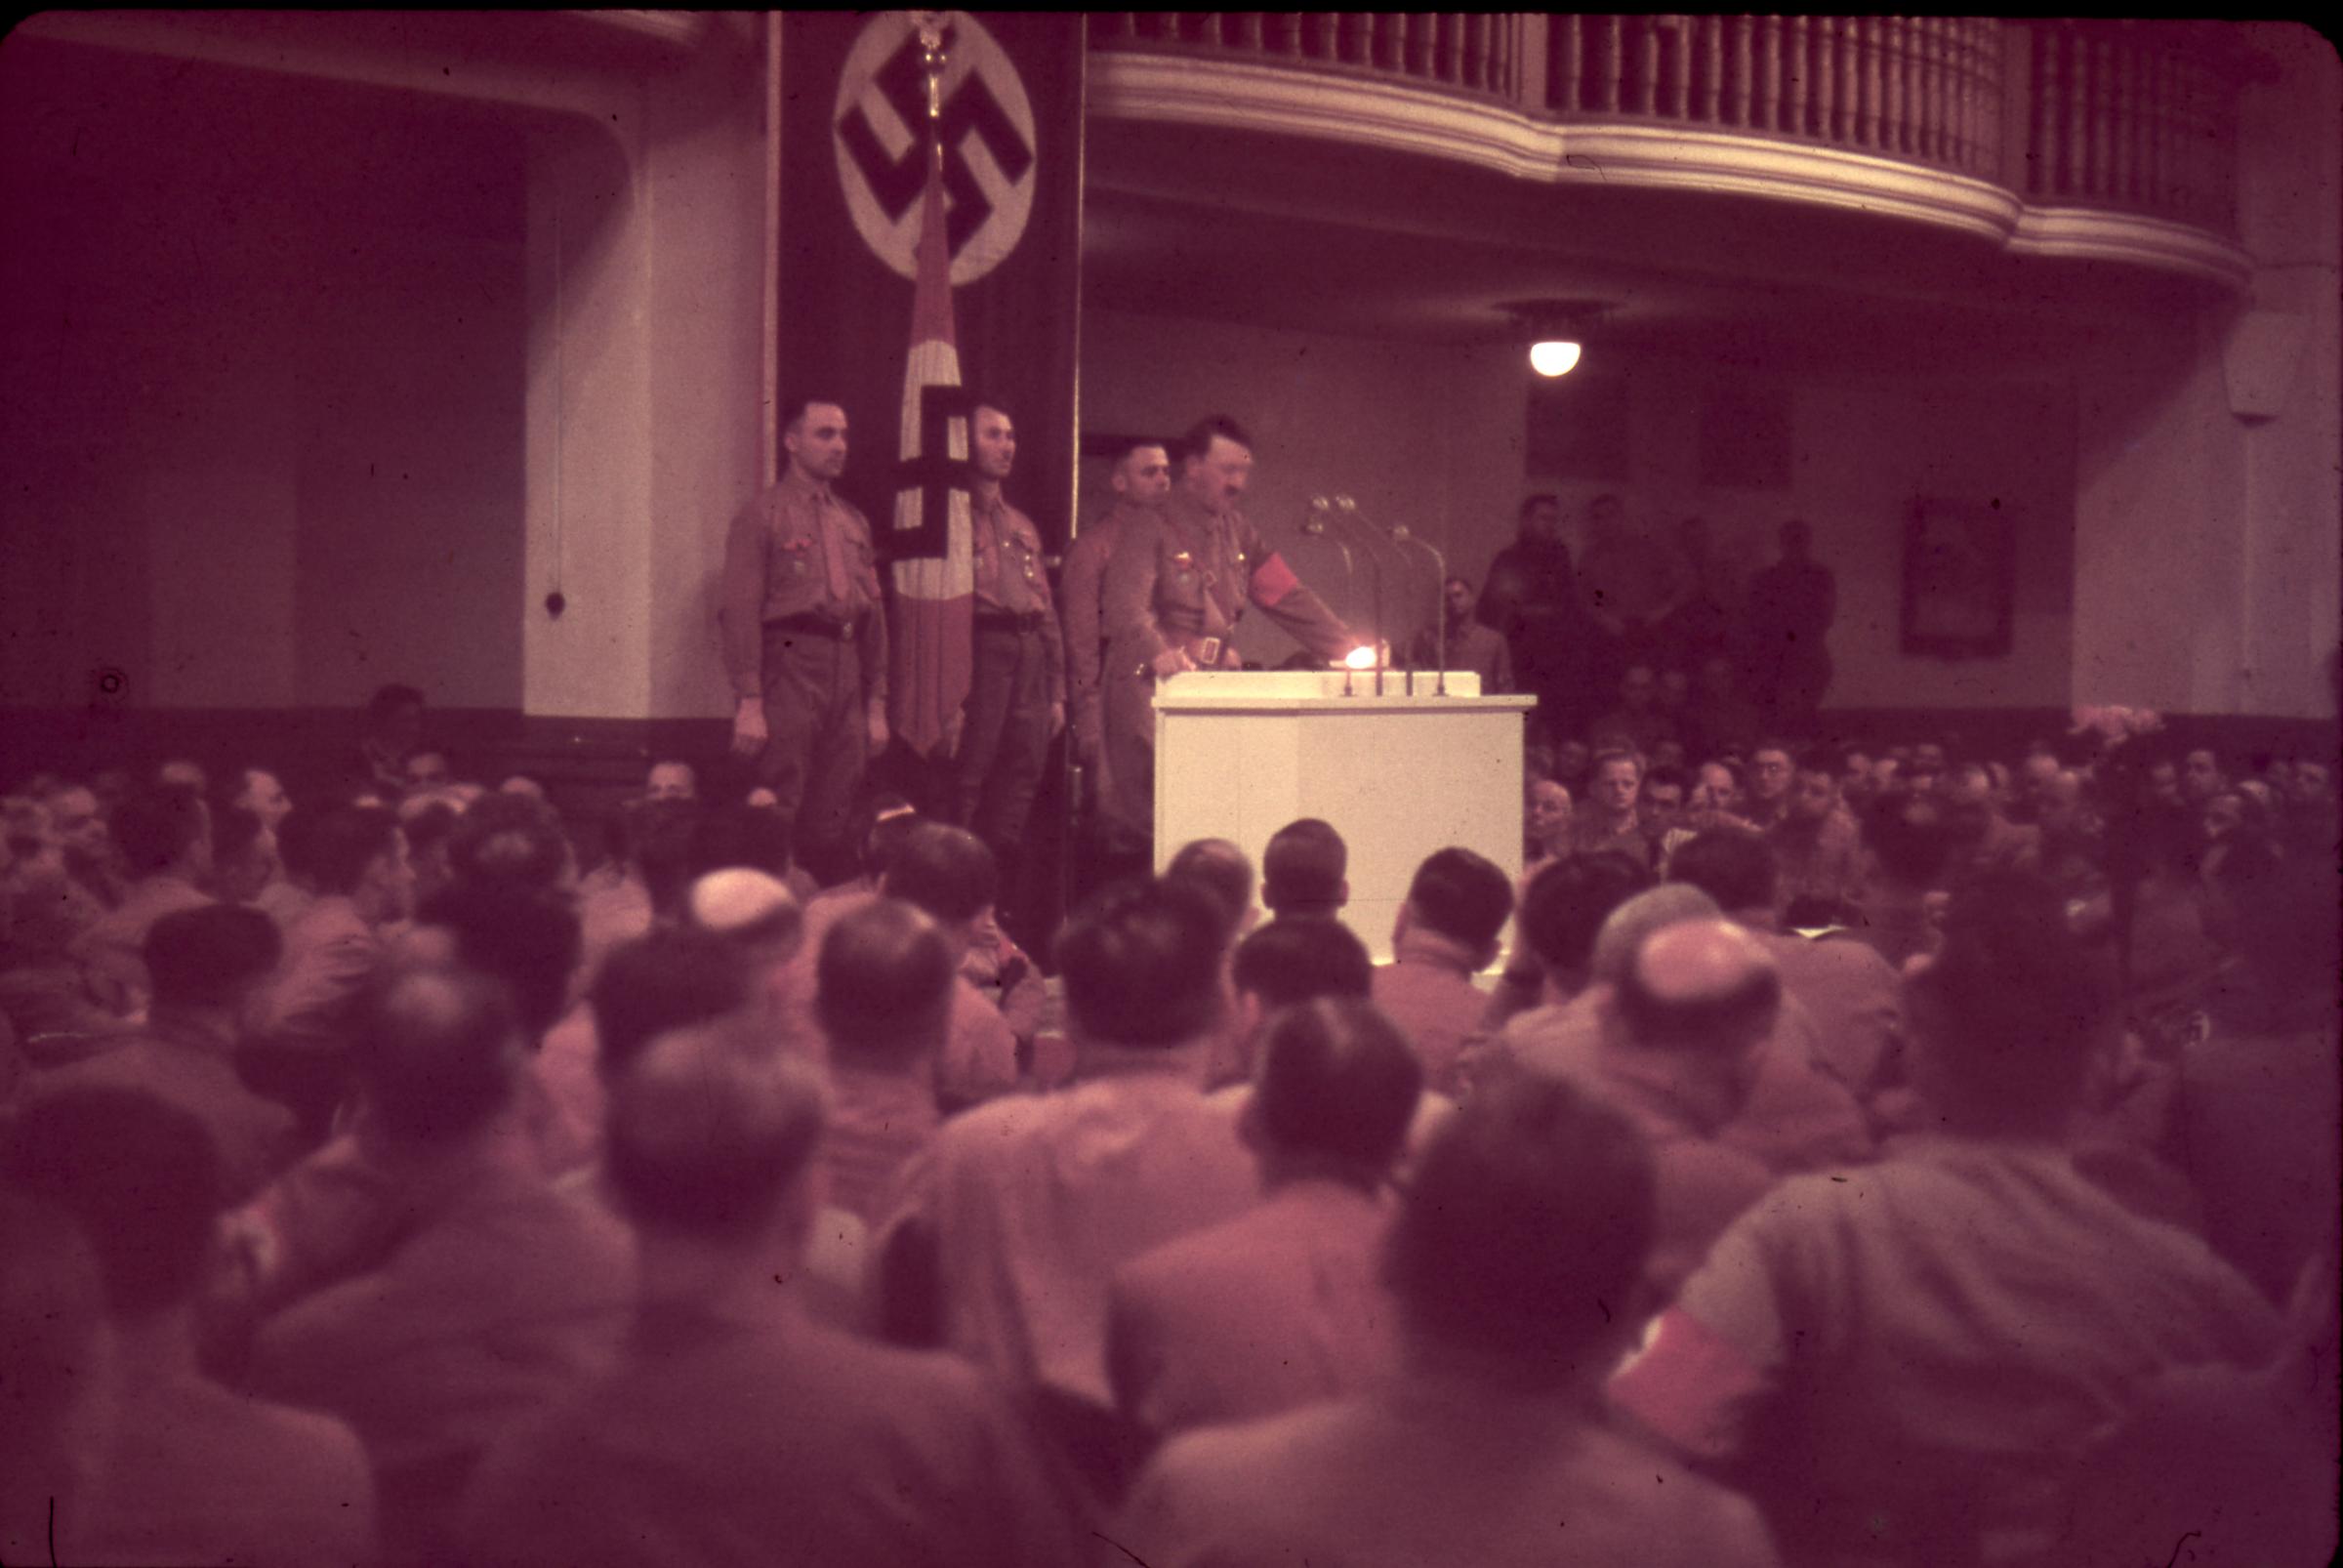 Hitler speaks in Munich on the 15th anniversary of the 1923 Beer Hall Putsch, in which Hitler and other Nazi party members attempted to overthrow the German government.